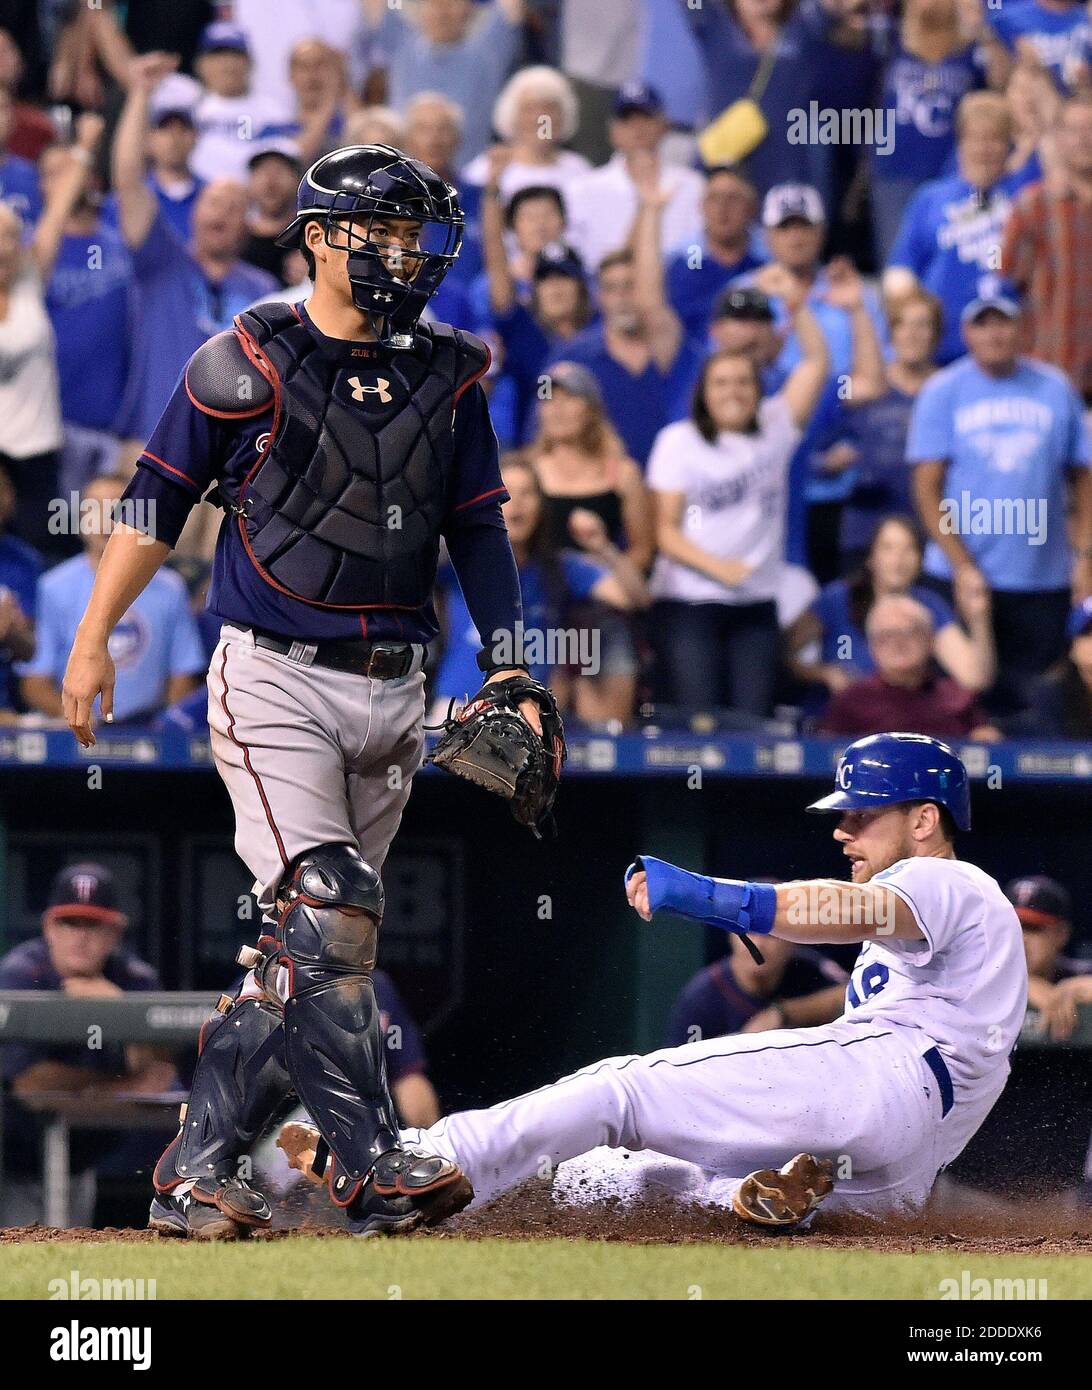 NO FILM, NO VIDEO, NO TV, NO DOCUMENTARY - The Kansas City Royals' Ben Zobrist scores behind Minnesota Twins catcher Kurt Suzuki on a sacrifice fly by Lorenzo Cain to tie the game in the eighth inning on Wednesday, Sept. 9, 2015, at Kauffman Stadium in Kansas City, Mo. (John Sleezer/Kansas City Star/TNS) Stock Photo